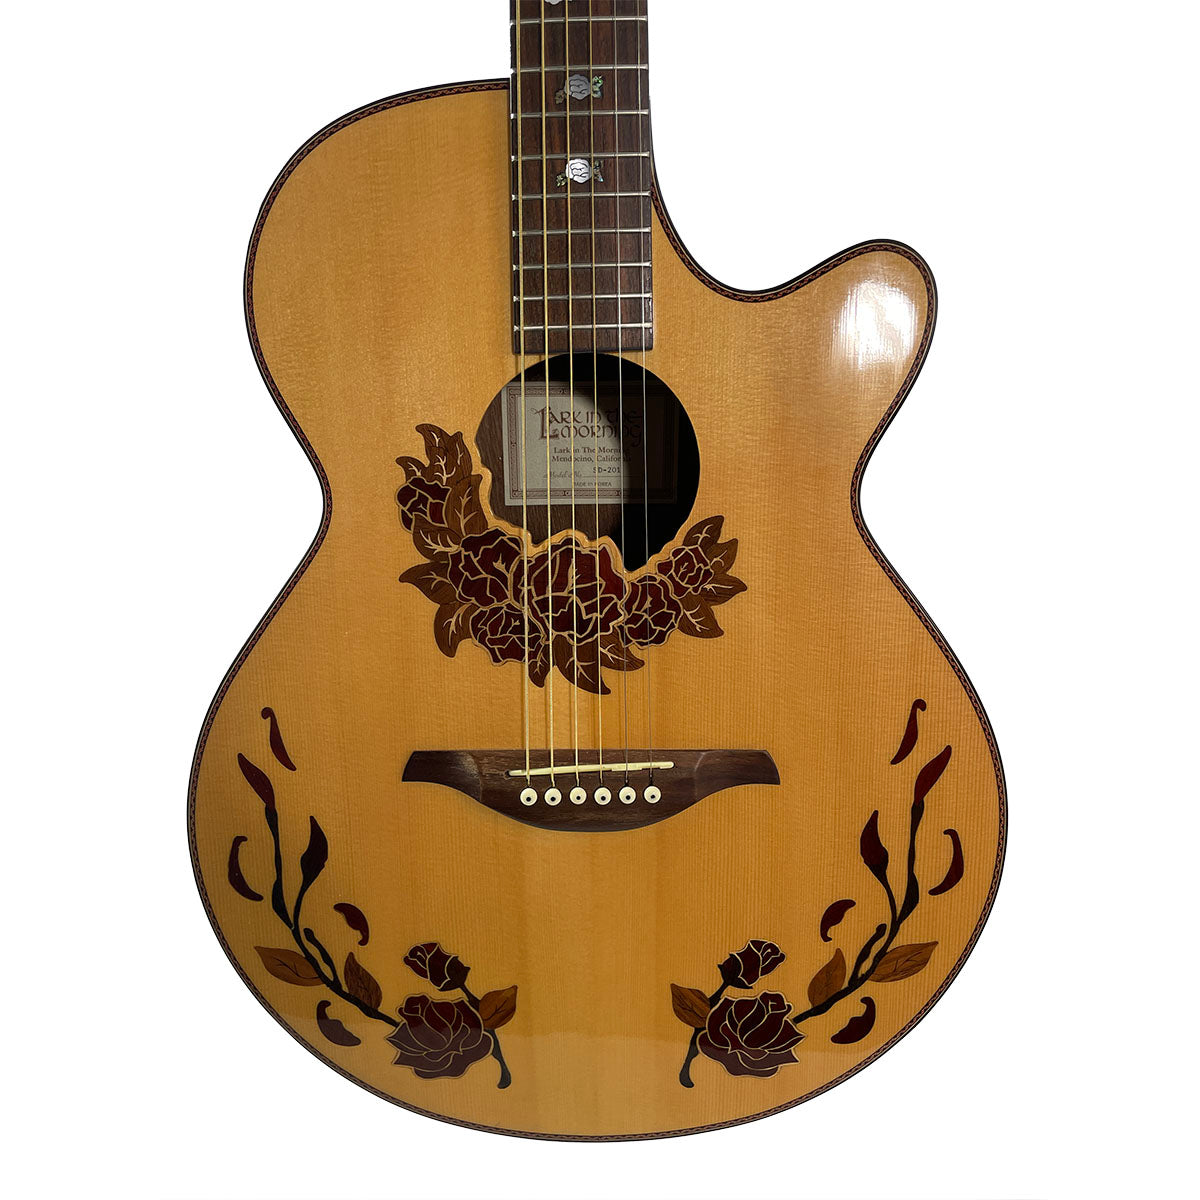 Lark in the Morning Cutaway Guitar with Inlays, Shopworn Acoustic Guitar Lark in the Morning   